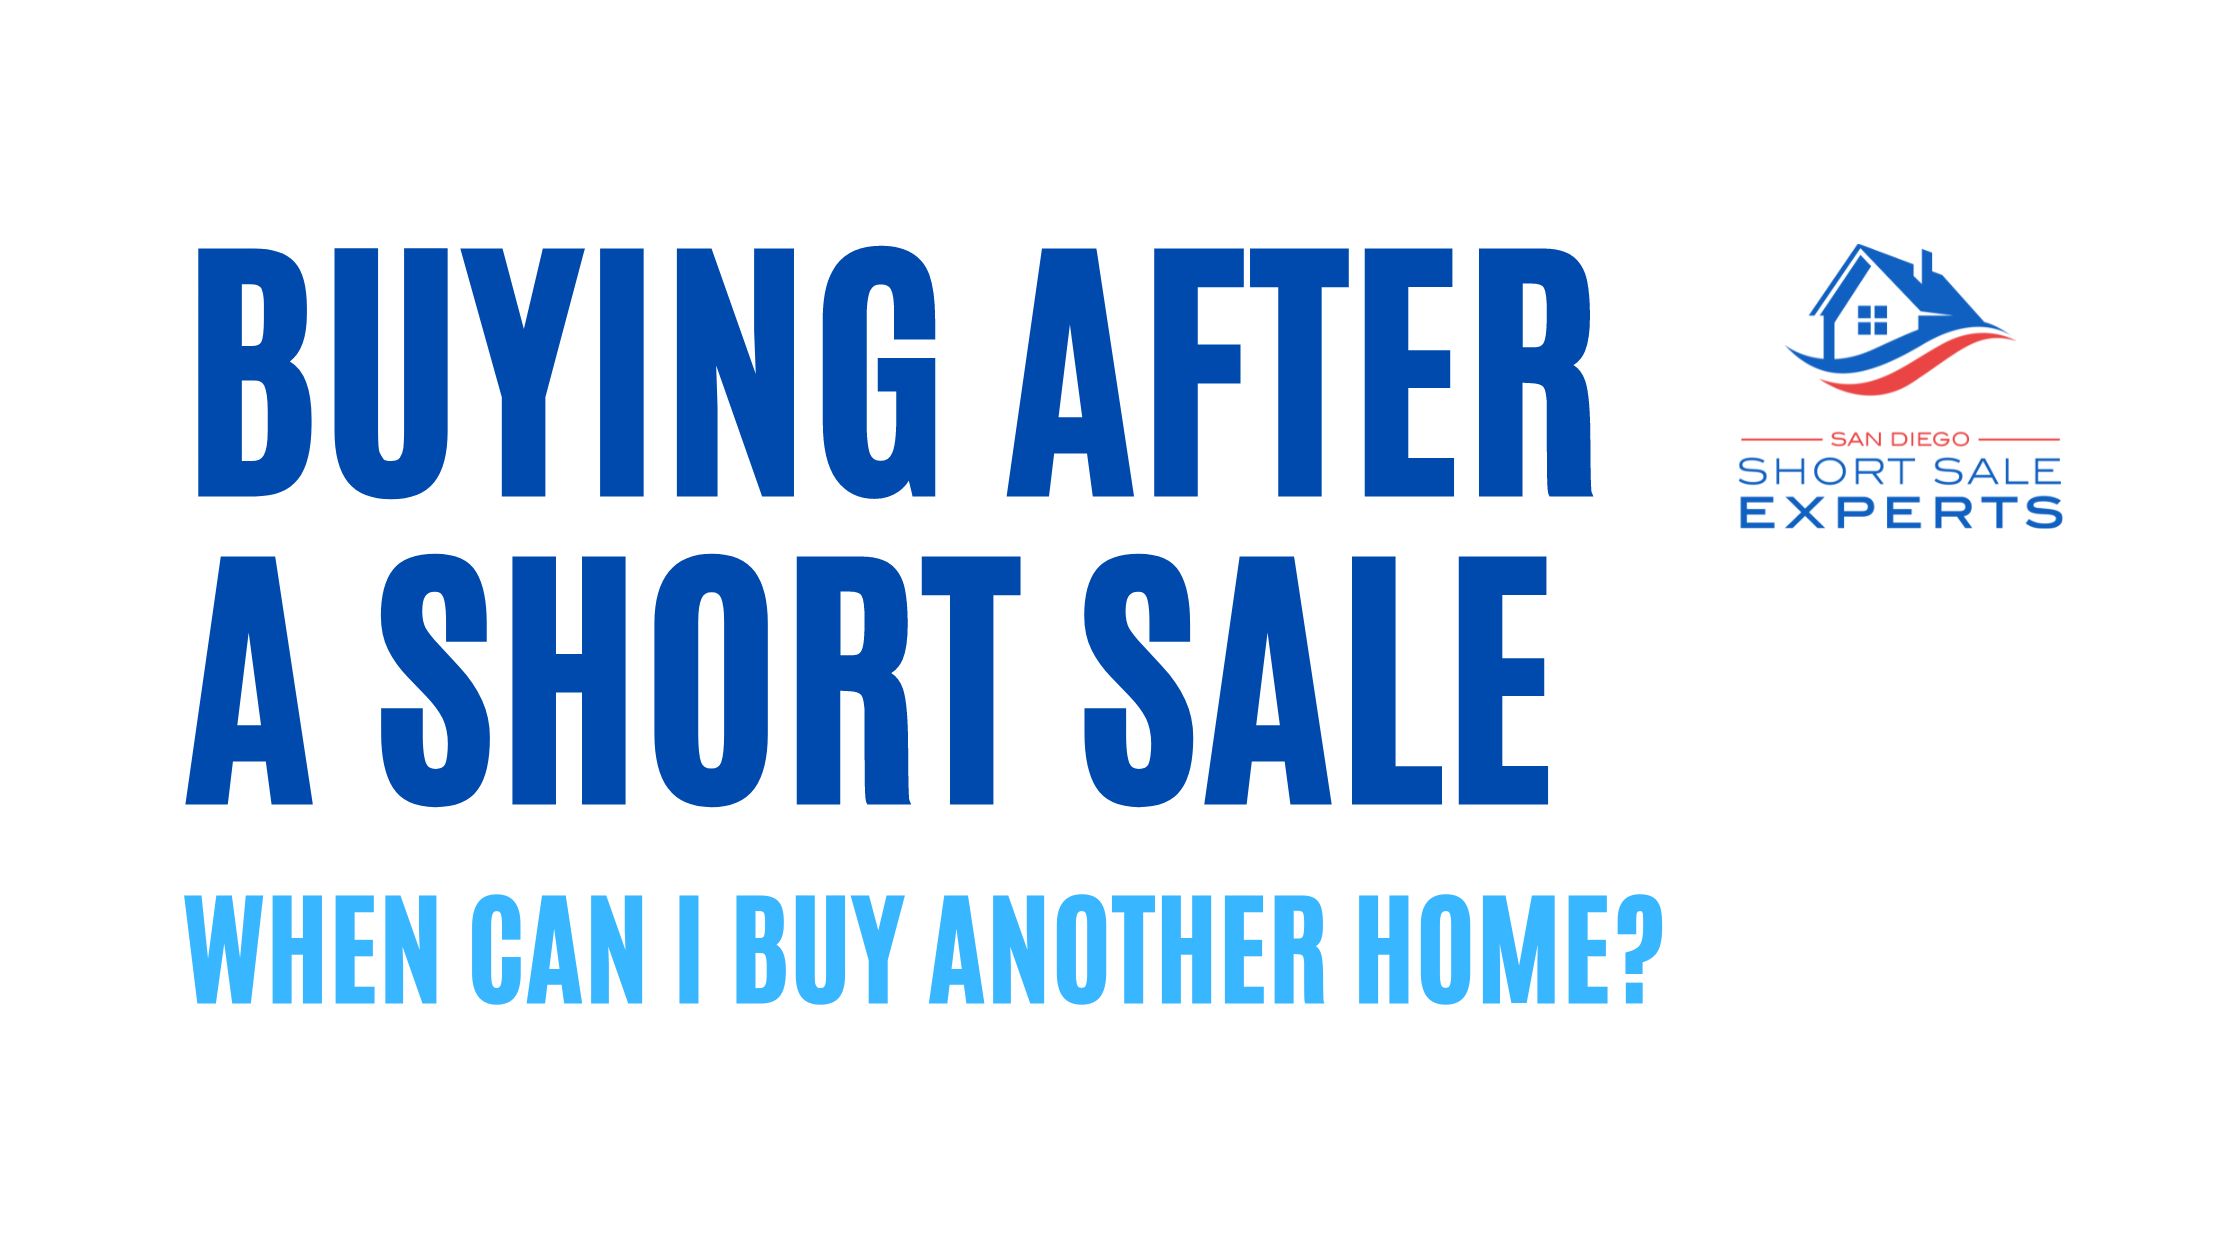 when can i buy another home after a short sale or foreclosure